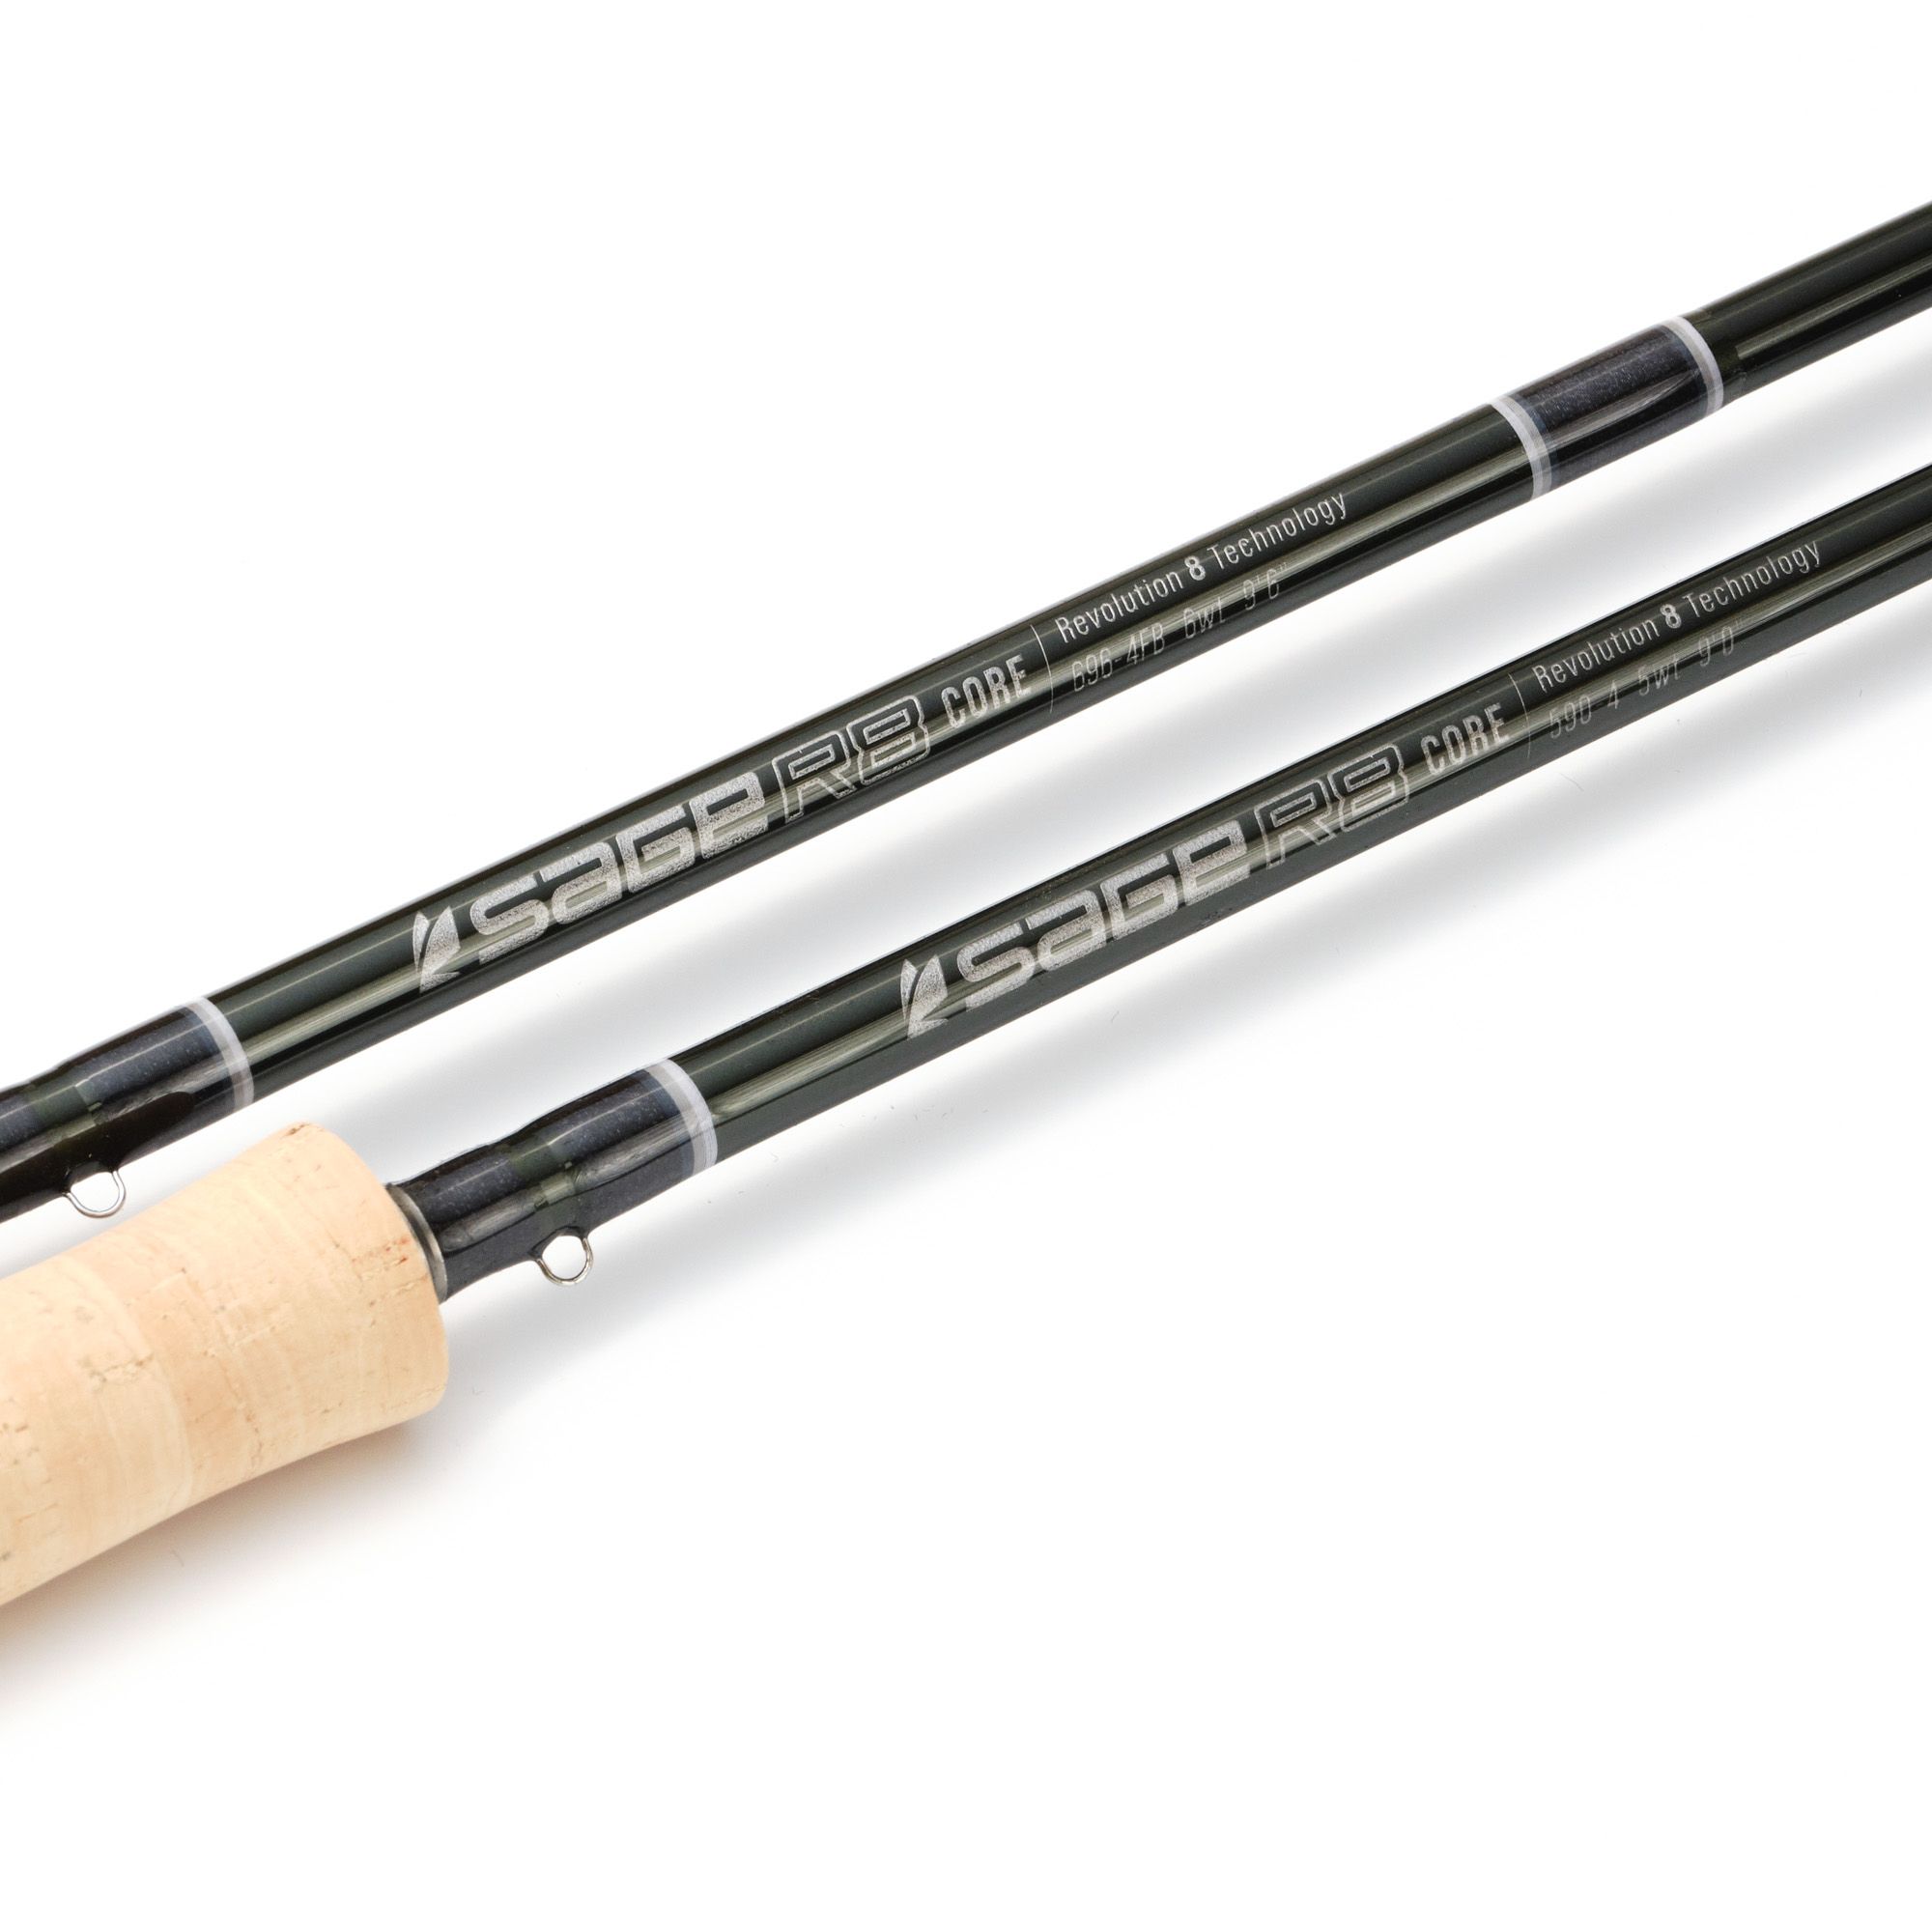 Sage R8 Core Fly Rod - Fin & Game